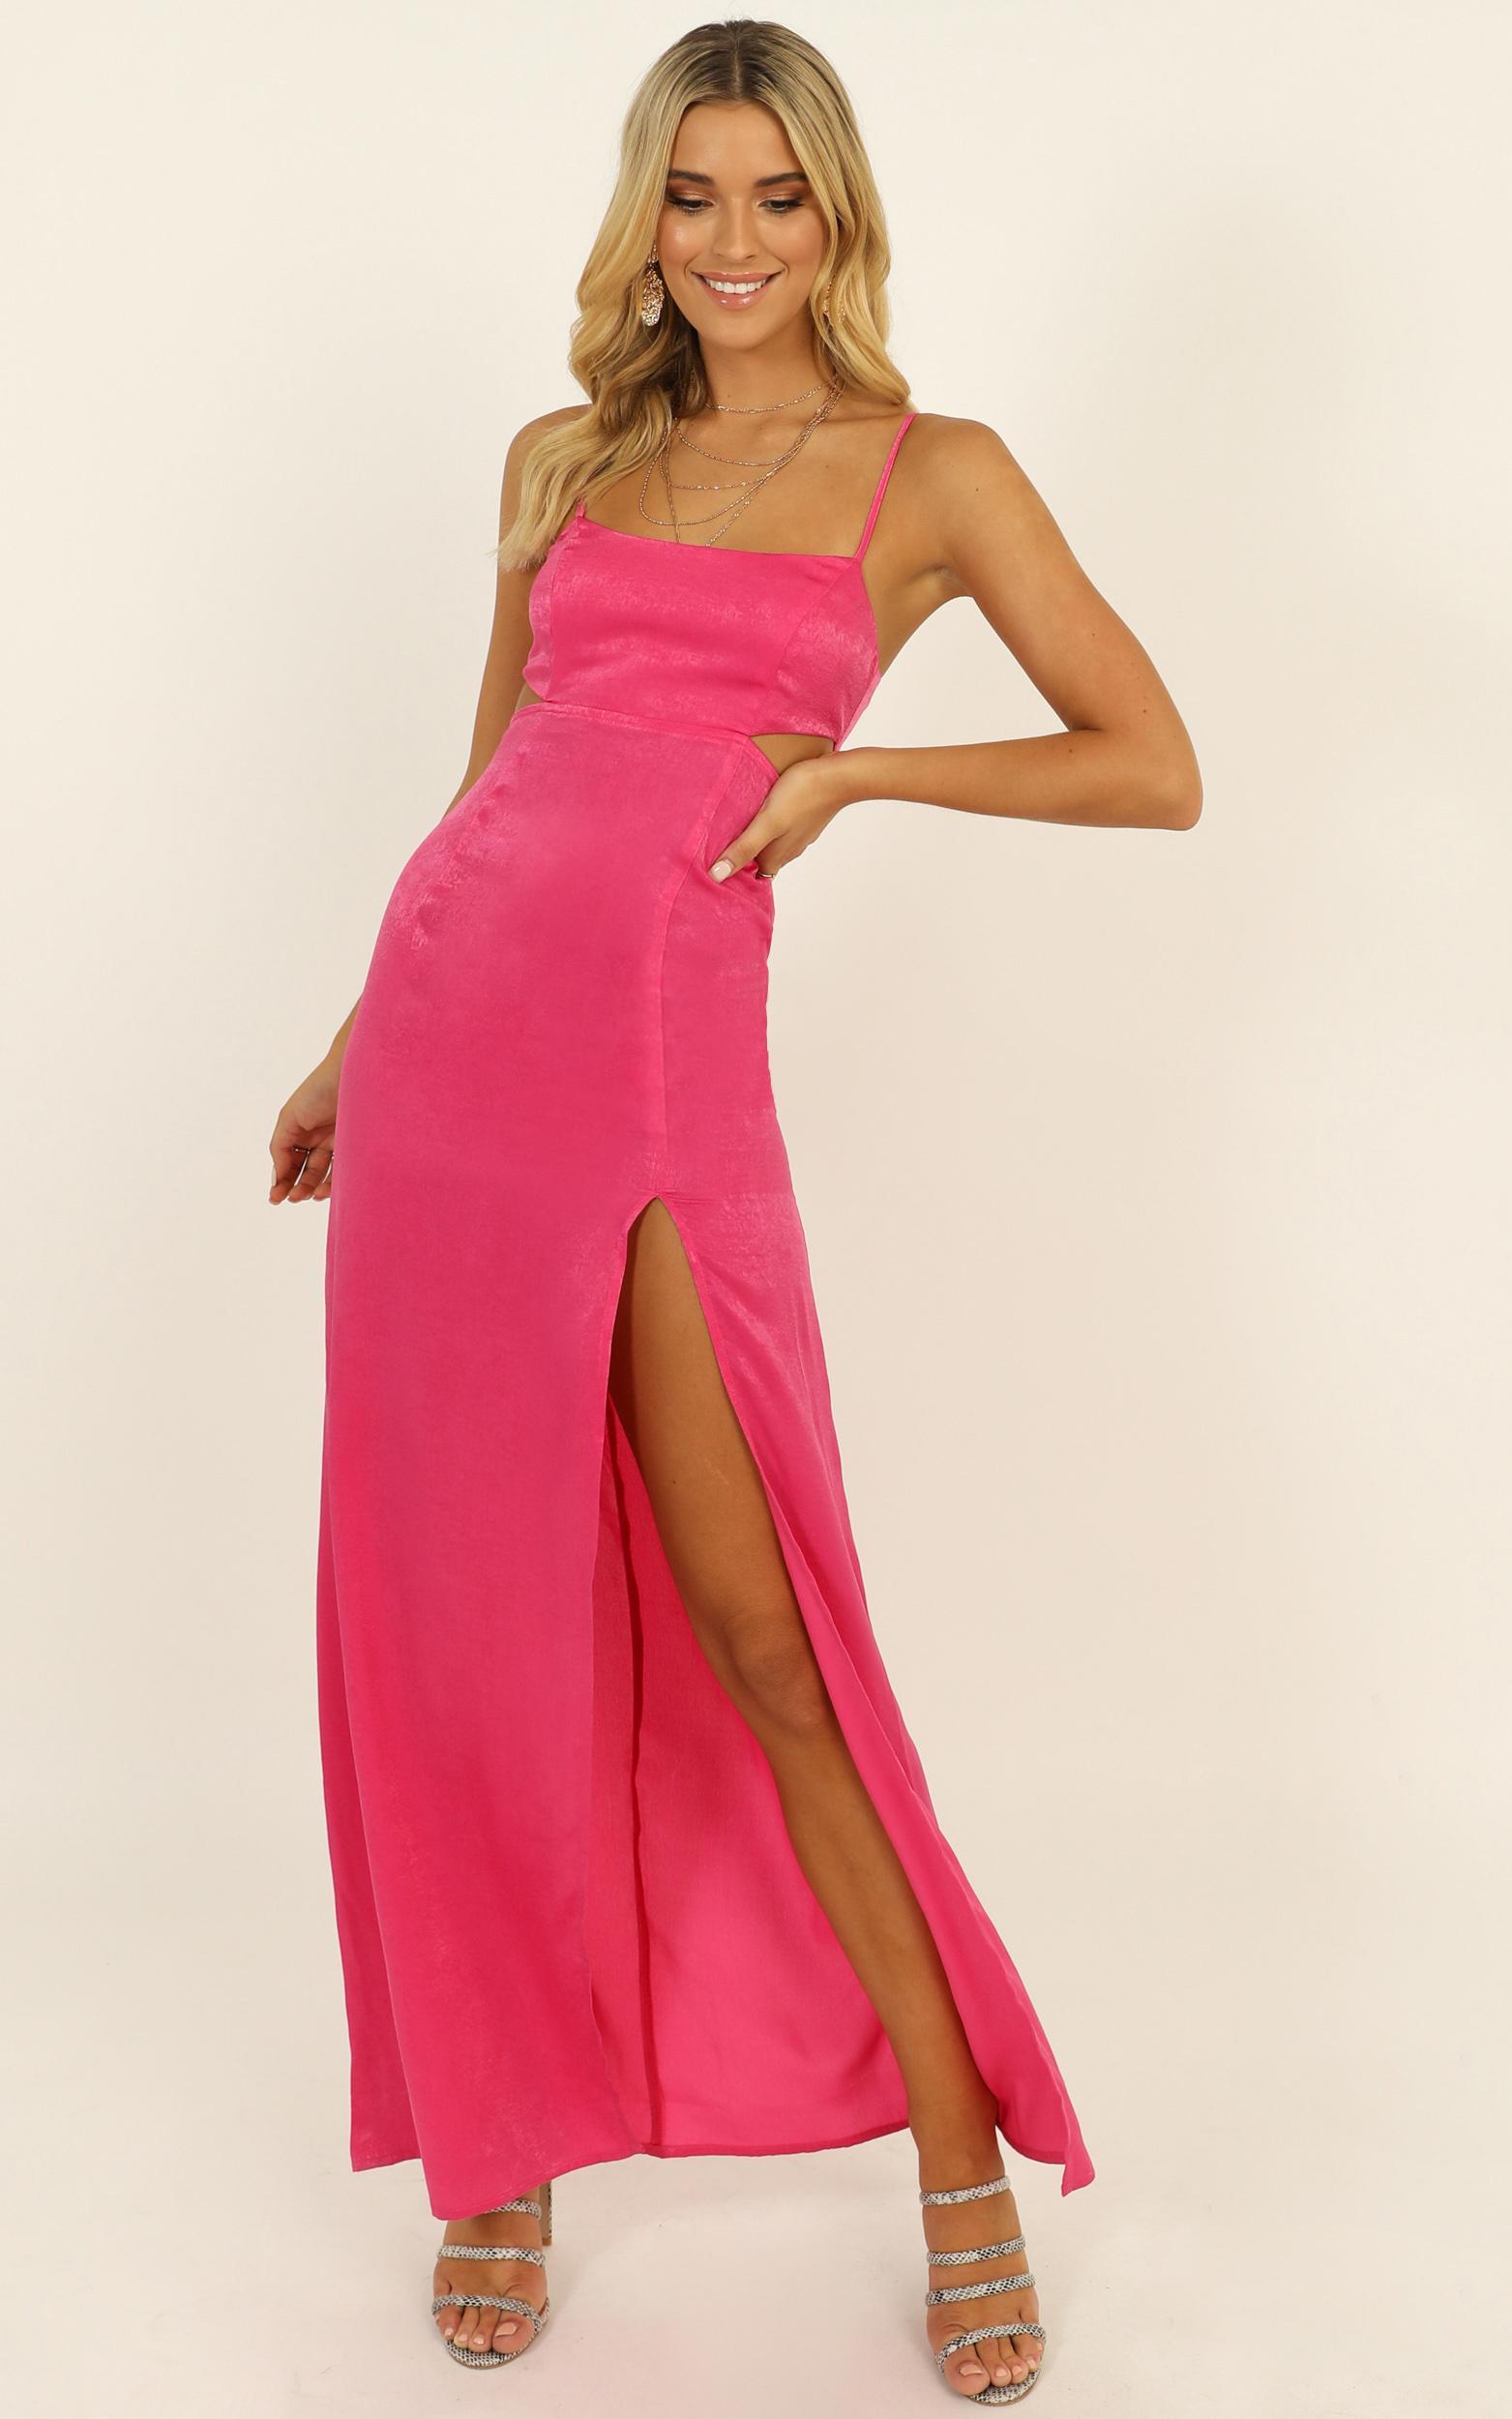 A Special Mention Dress in hot pink satin - 14 (XL), Pink, hi-res image number null